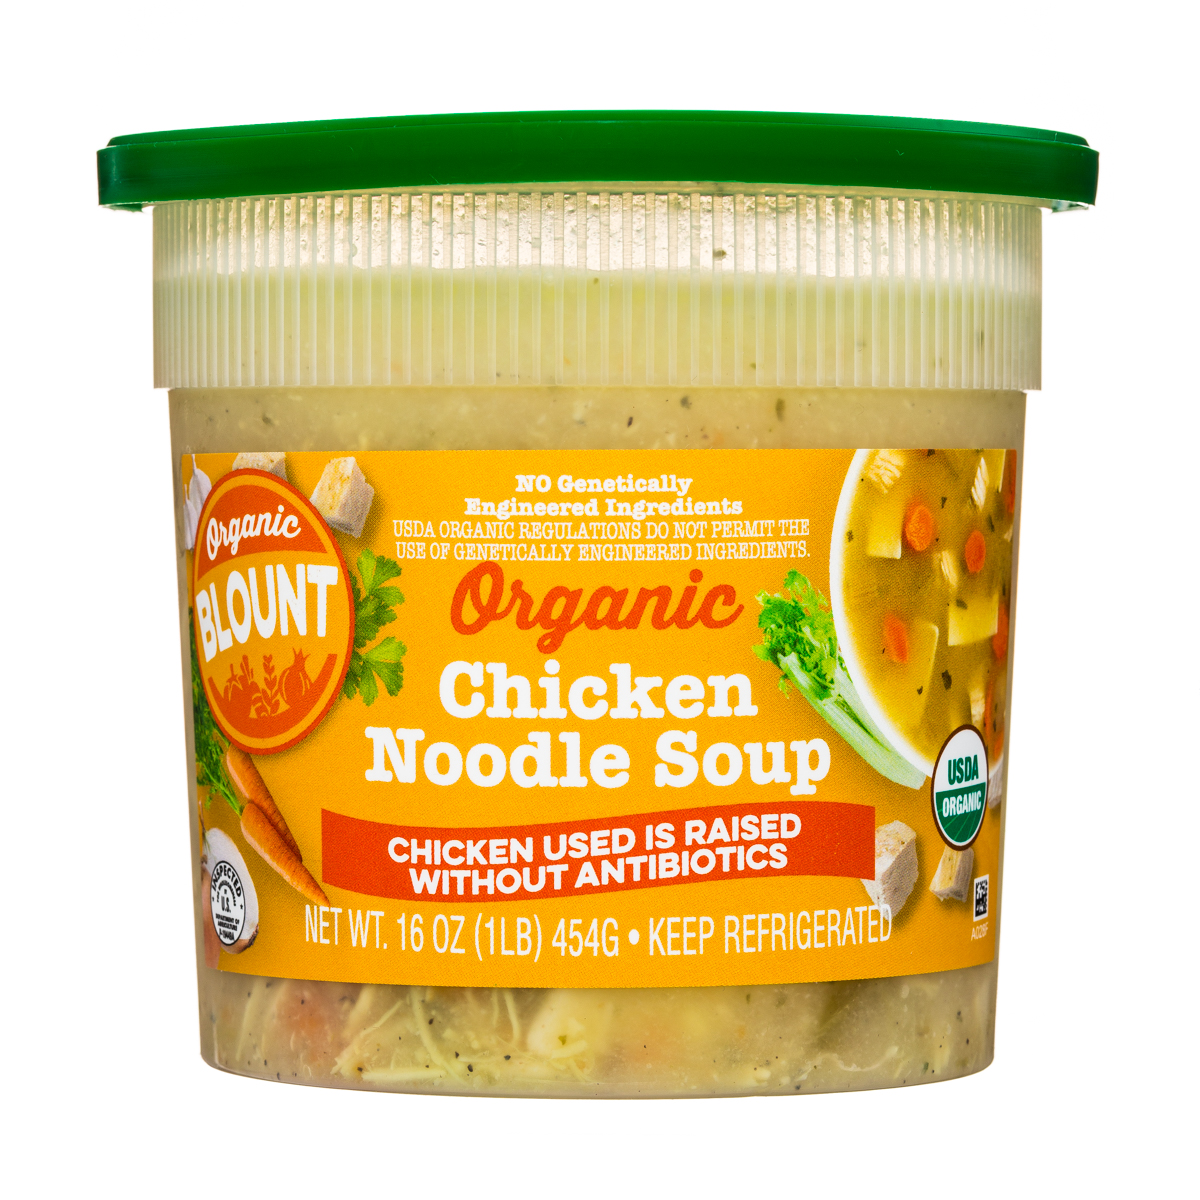 Organic Soup, Chicken Noodle, 17 oz at Whole Foods Market